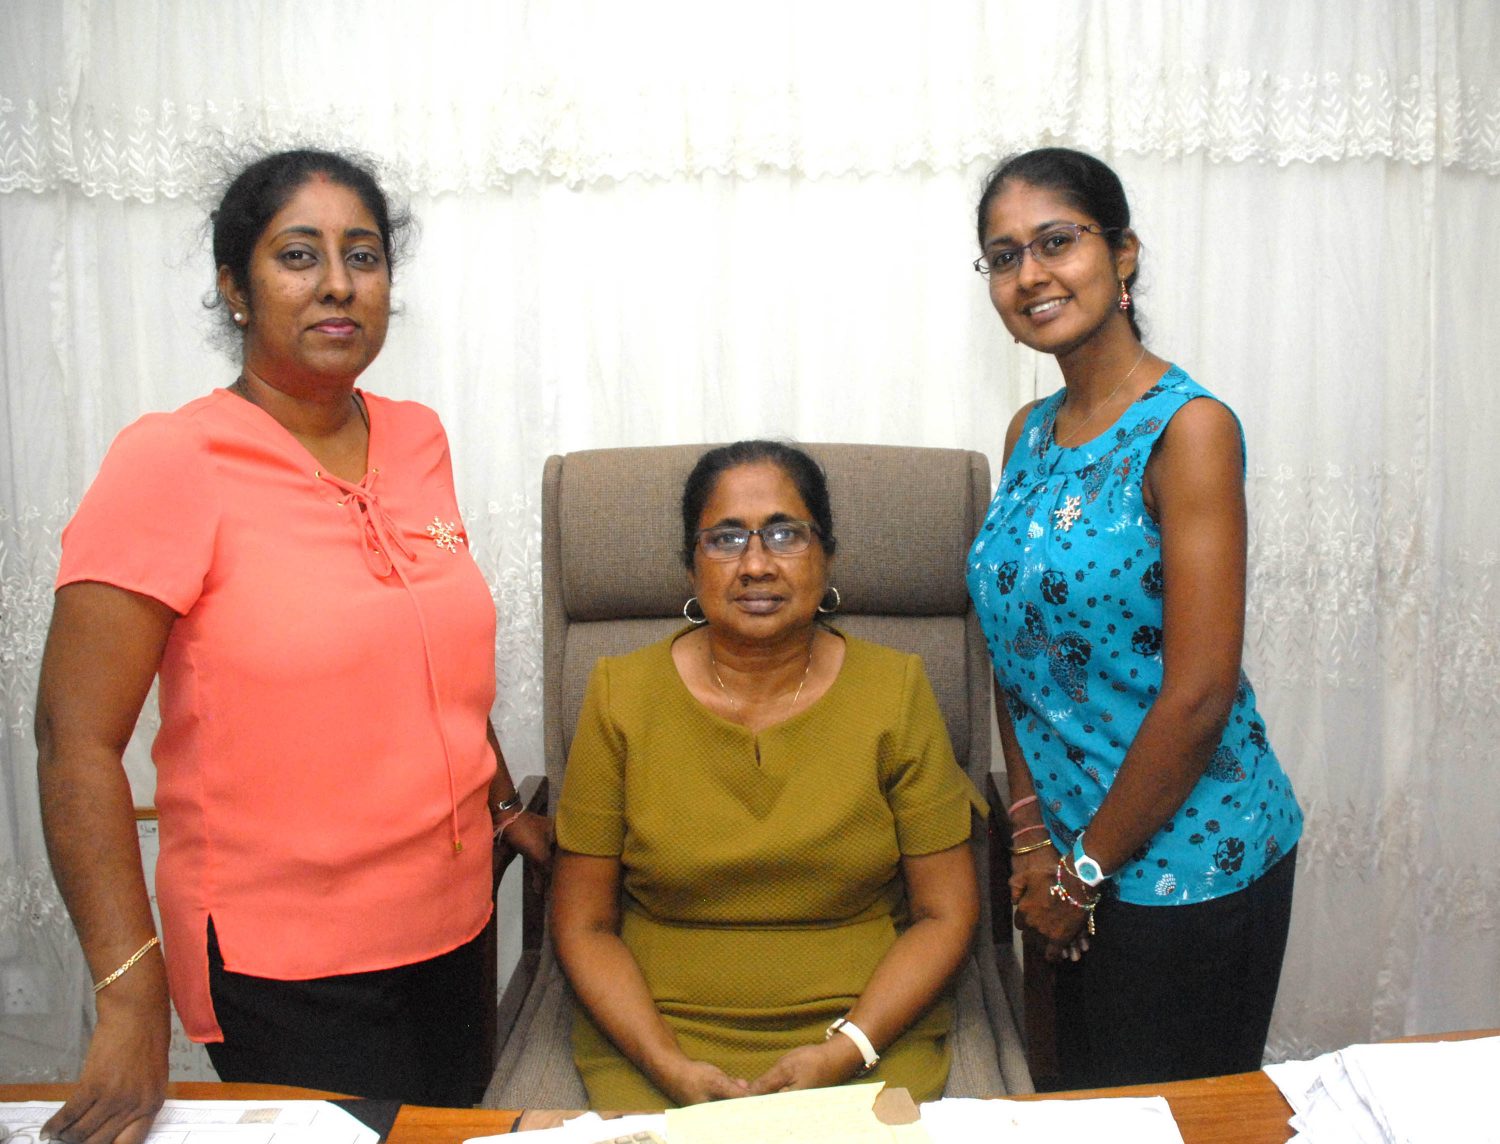 The Denmor management triumvirate Serojinee (left) and Upasna flanking their mother Fatma Sultan Mudlier